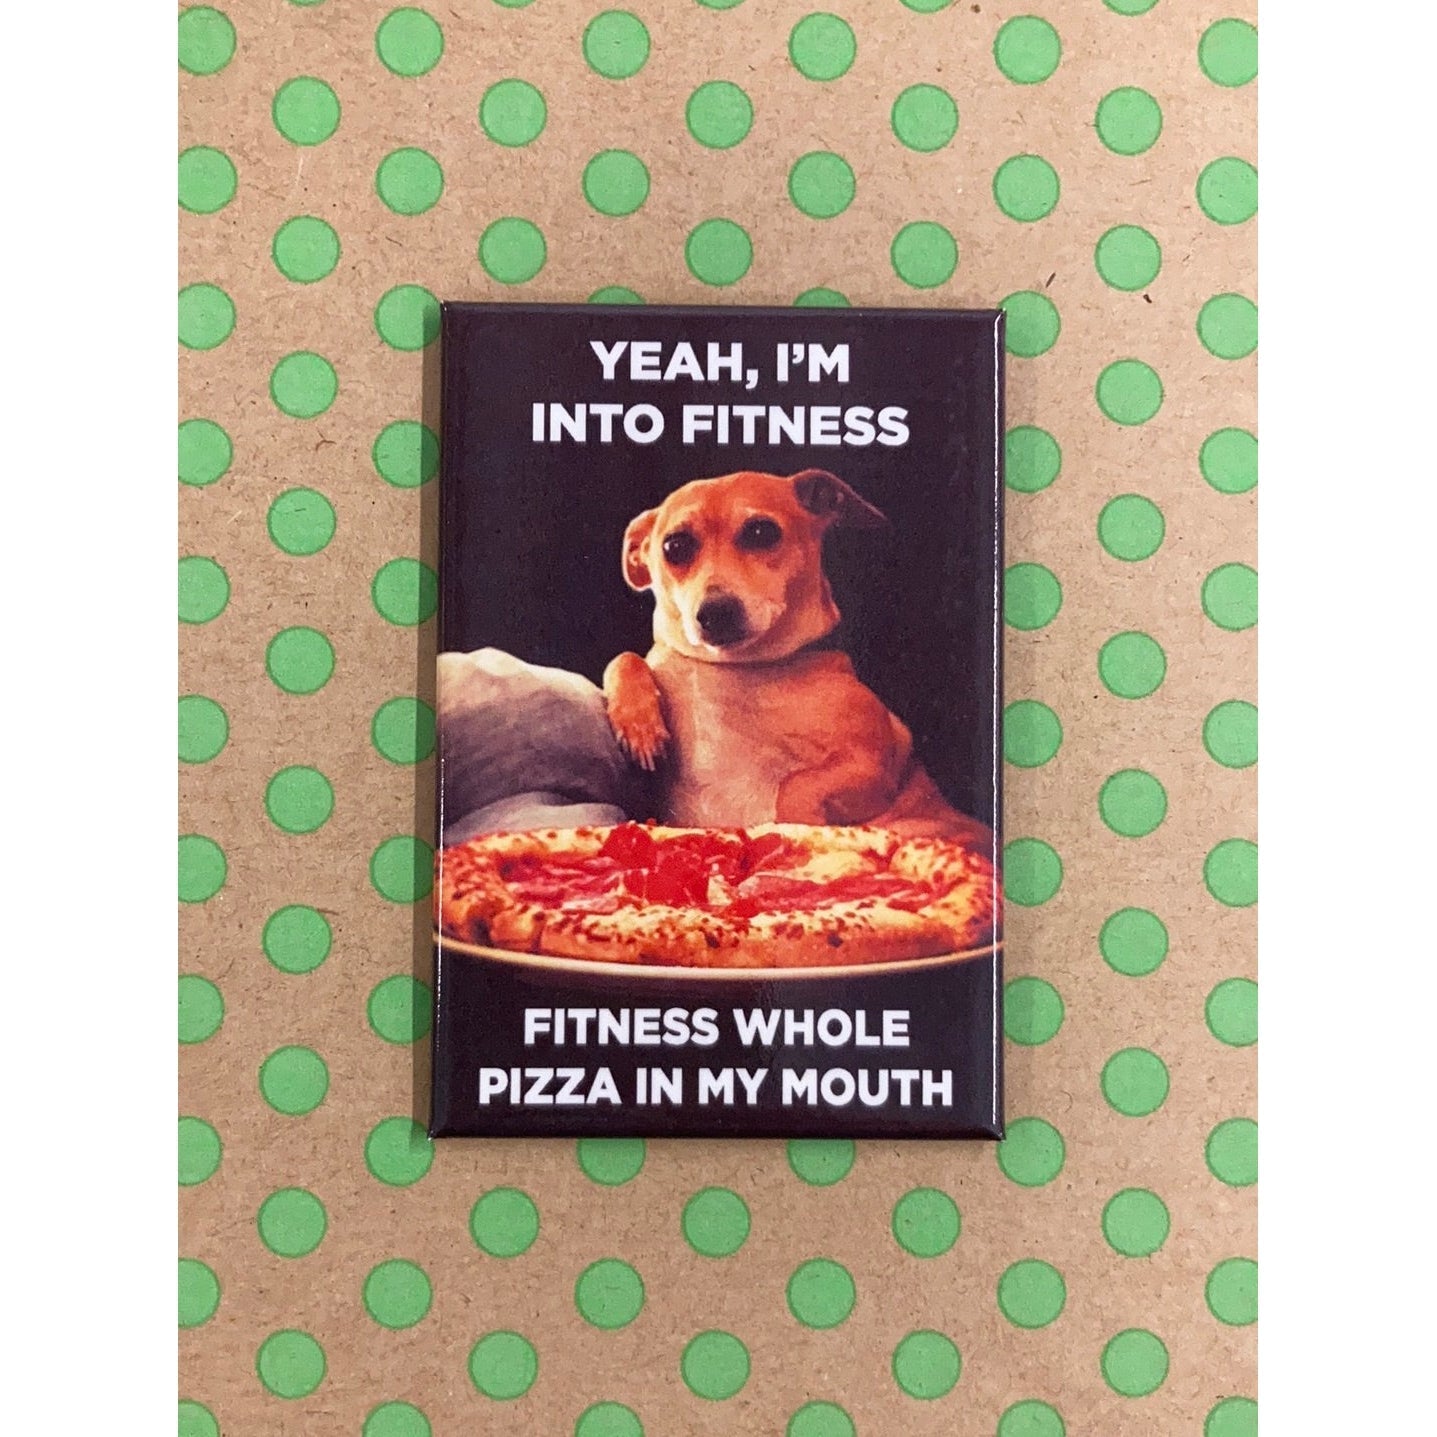 Yeah, I'm Into Fitness. Fitness Whole Pizza in My Mouth Fridge Magnet